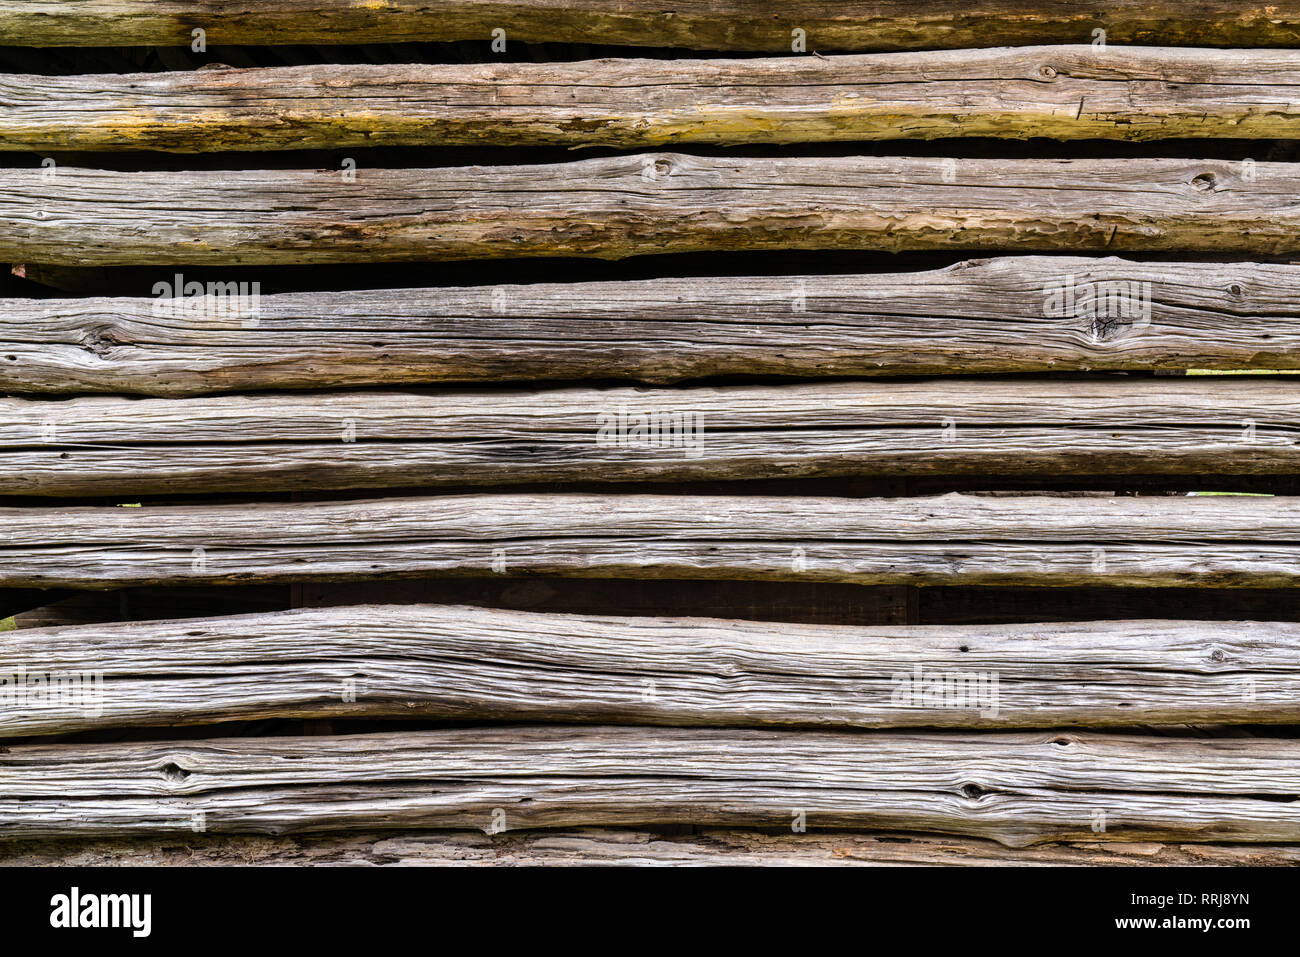 Old weathered log cabin exterior wall background Banque D'Images